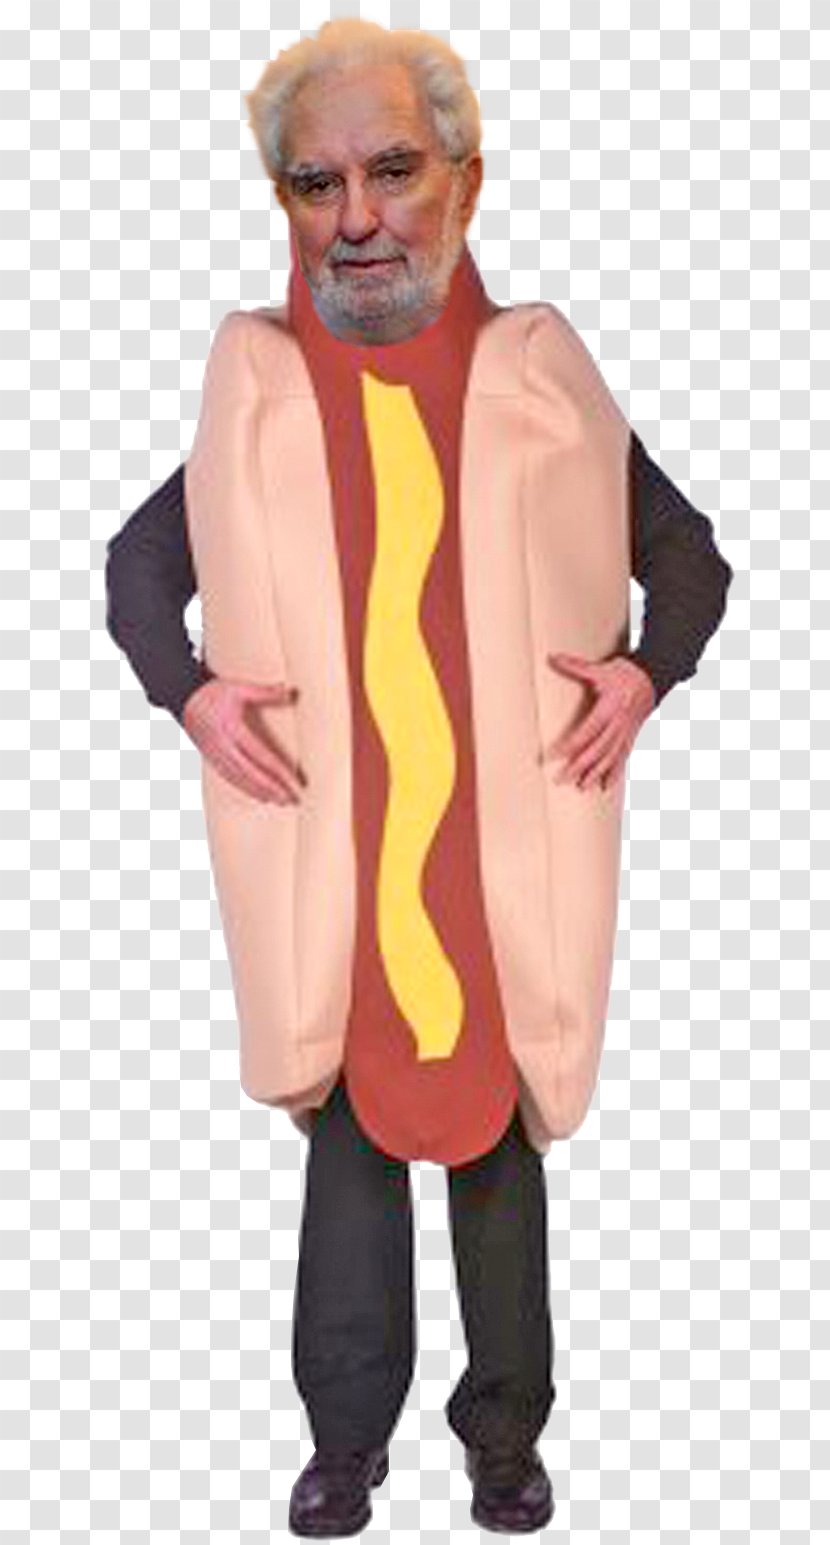 Hot Dog Halloween Costume Party Clothing - Waistcoat Transparent PNG